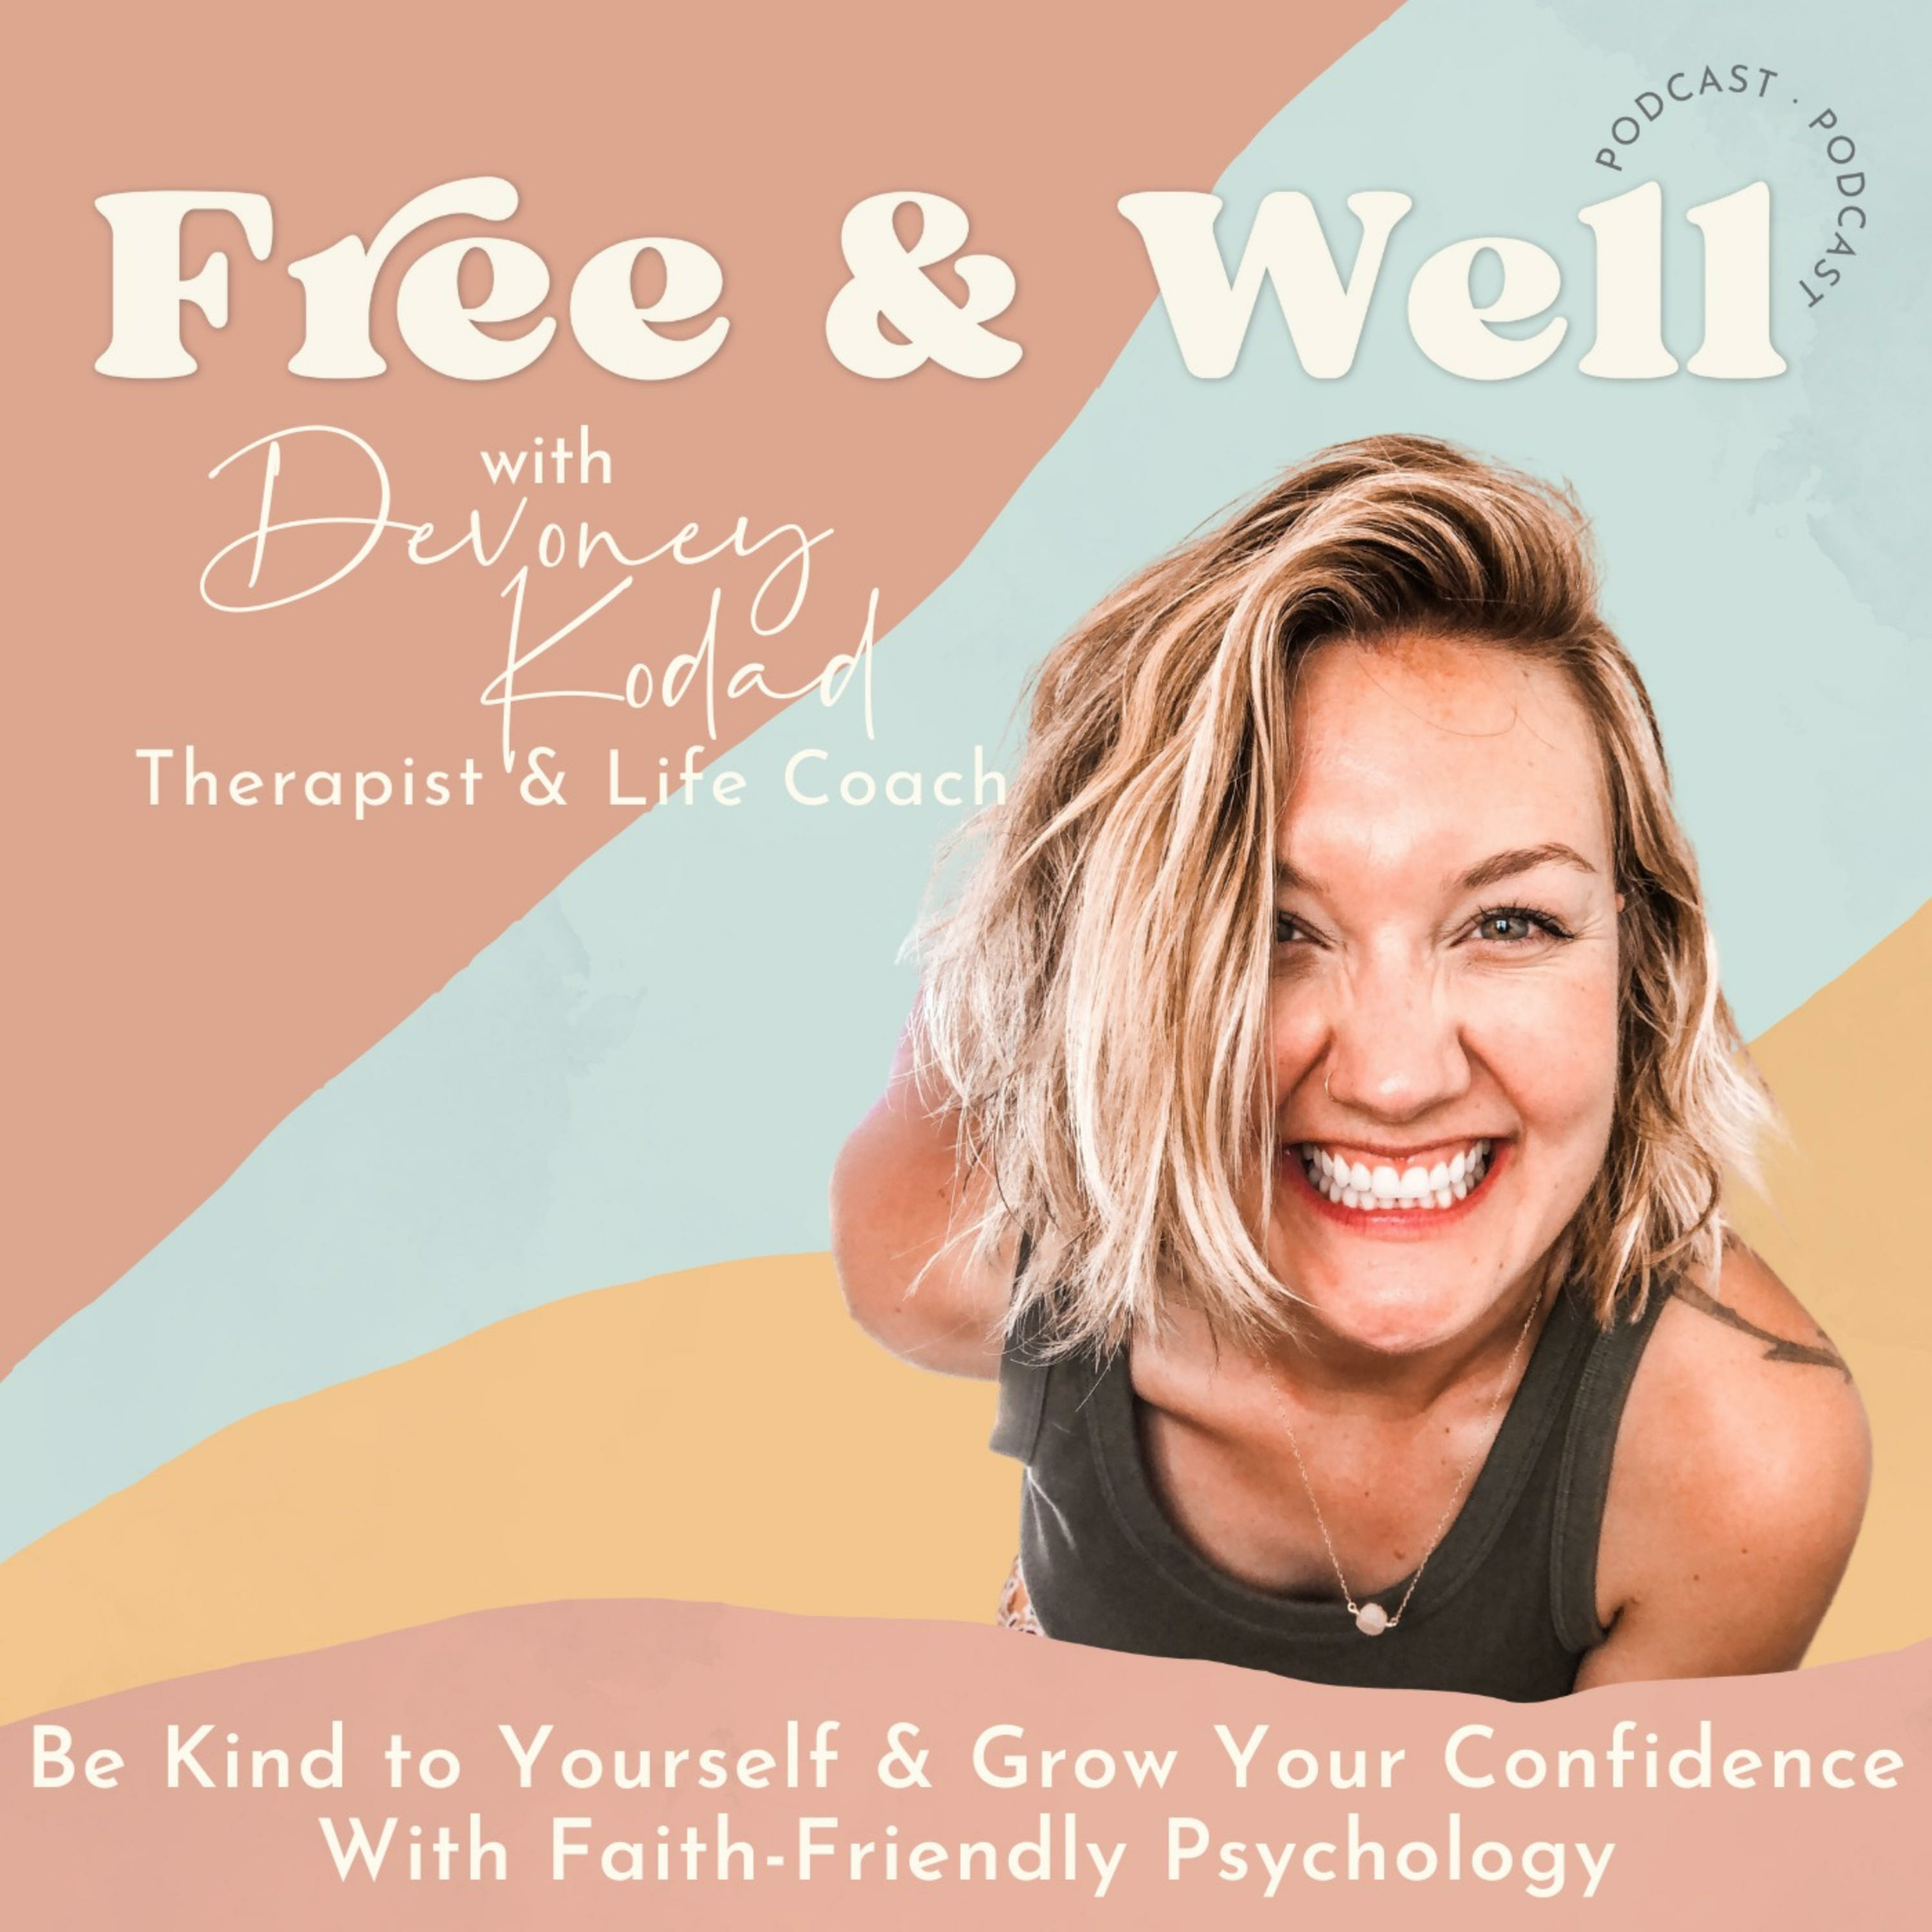 140 // Tired of Feeling Like You Need to Prove Yourself? 3 Steps to Stop Needing Other's Approval / Validation & Start Stepping Into Your God-Given Self Confidence & Self Worth